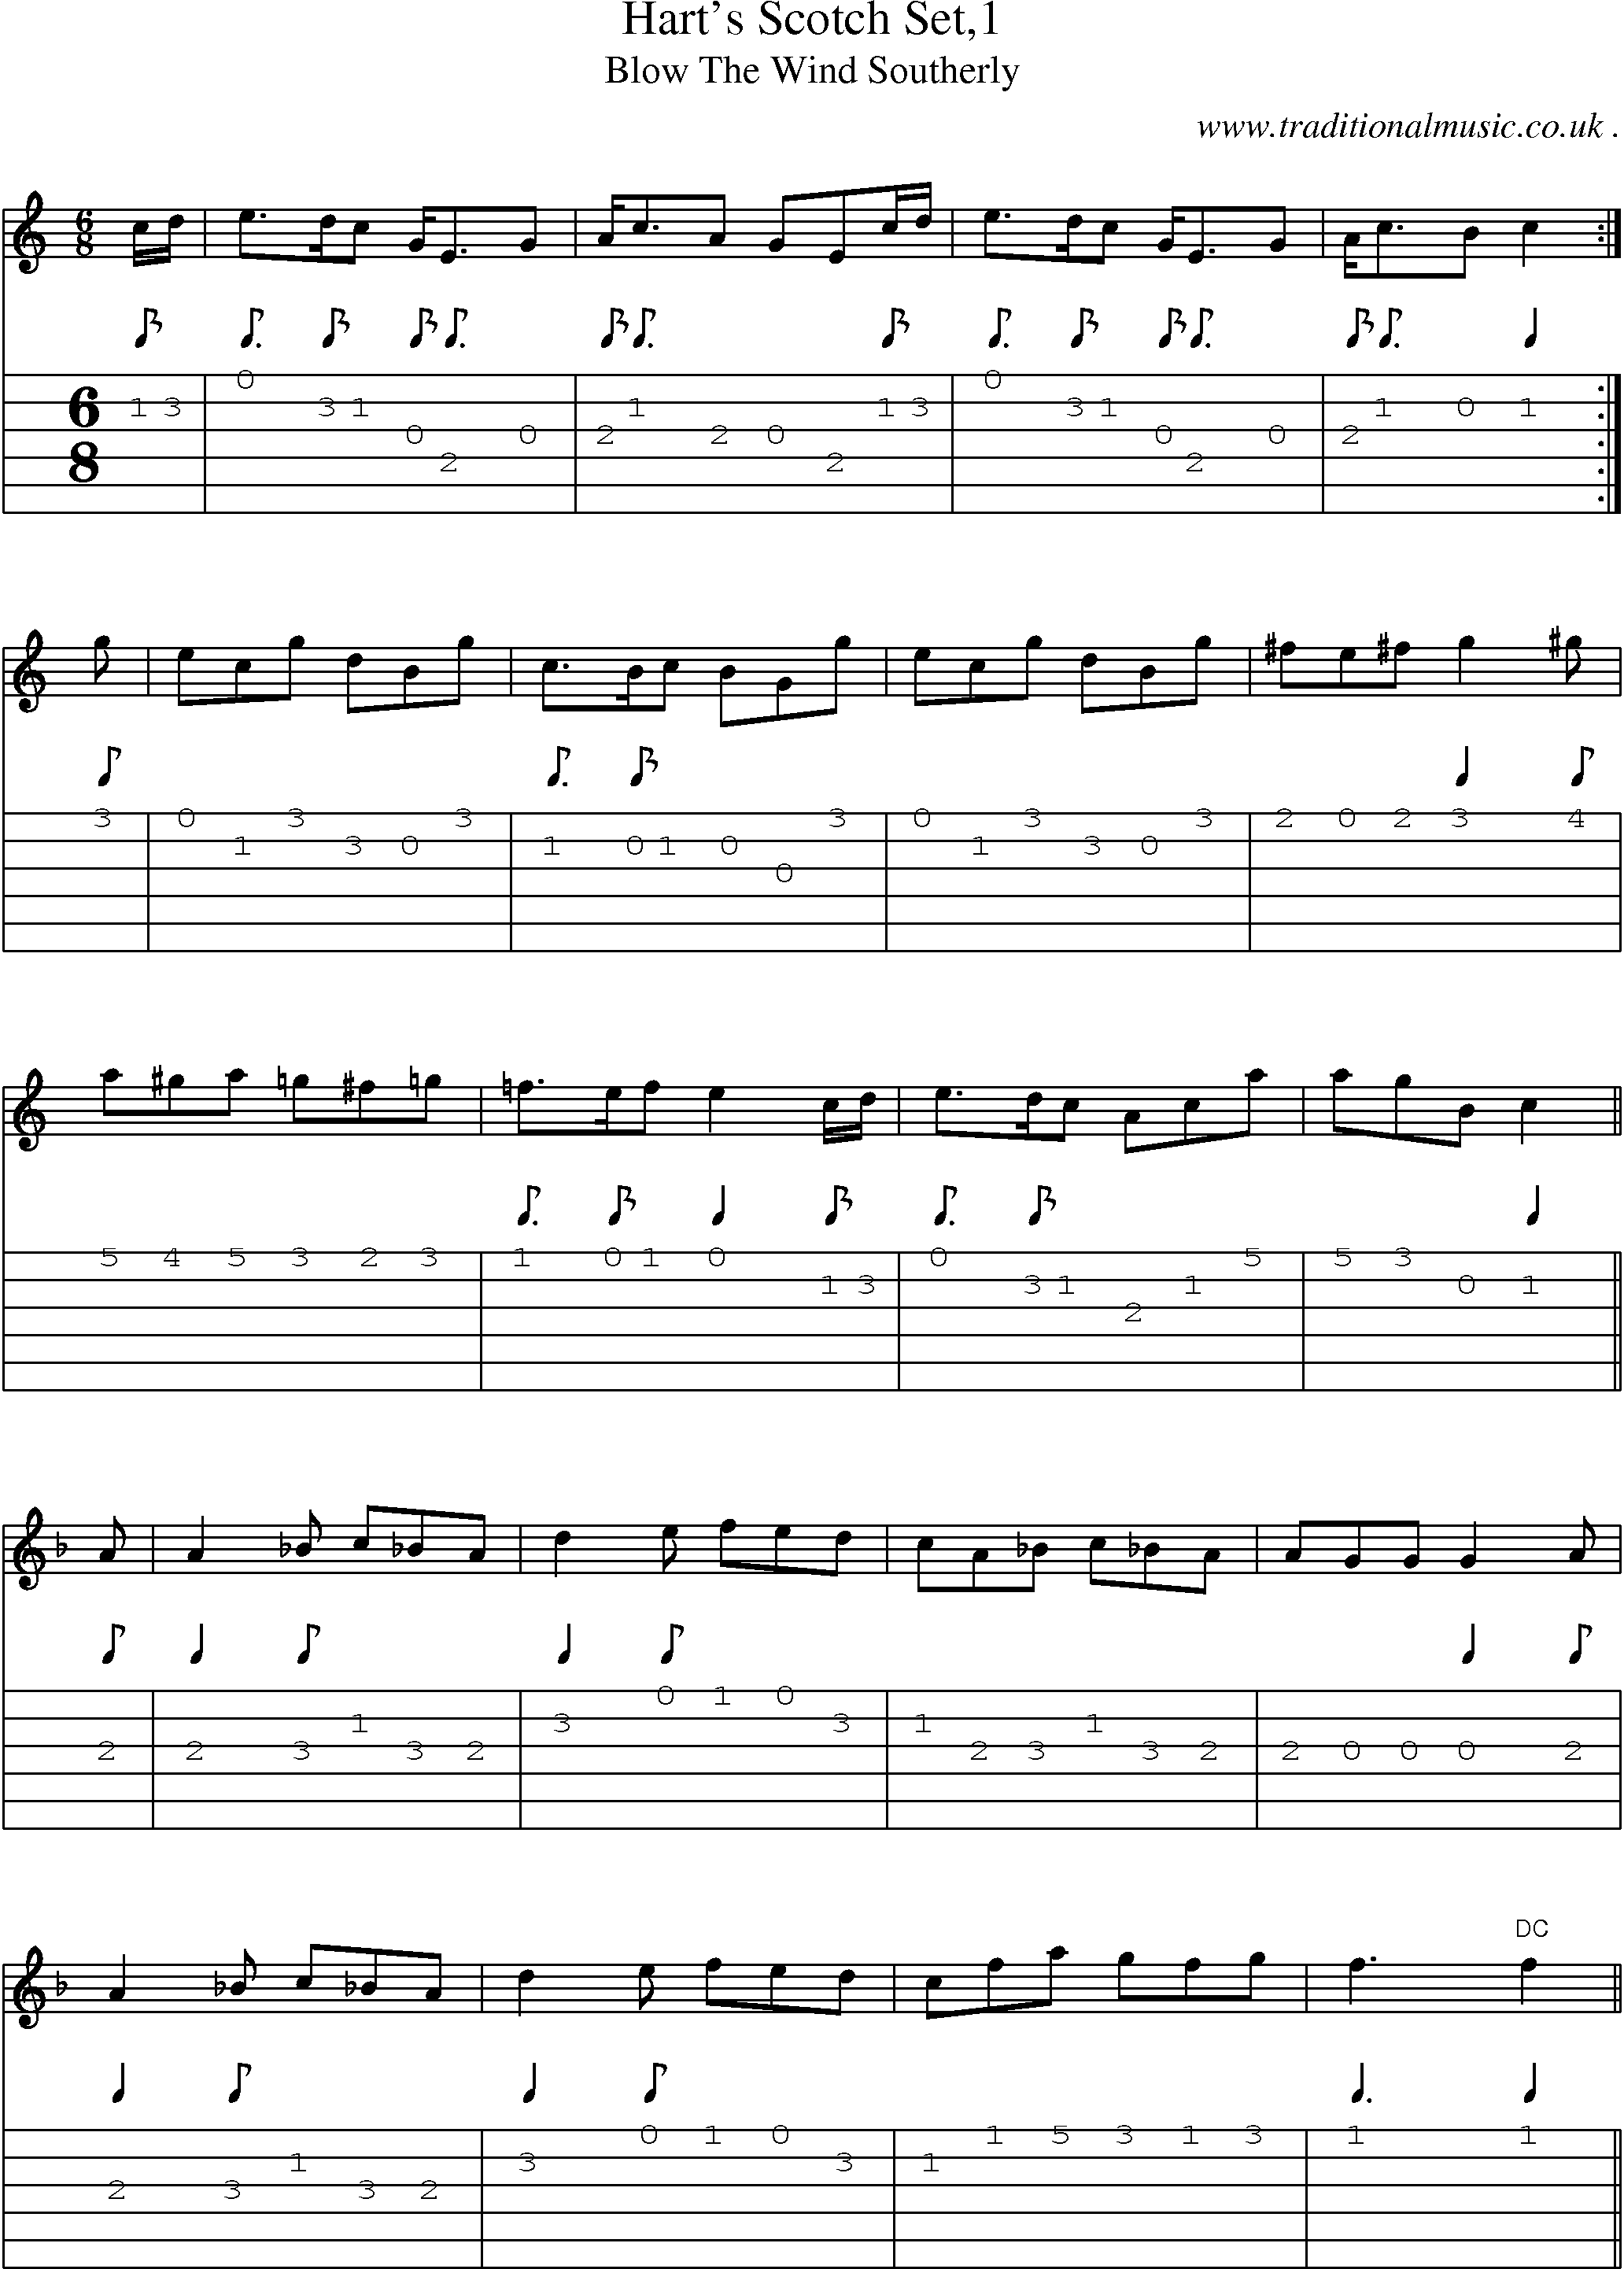 Sheet-Music and Guitar Tabs for Harts Scotch Set1